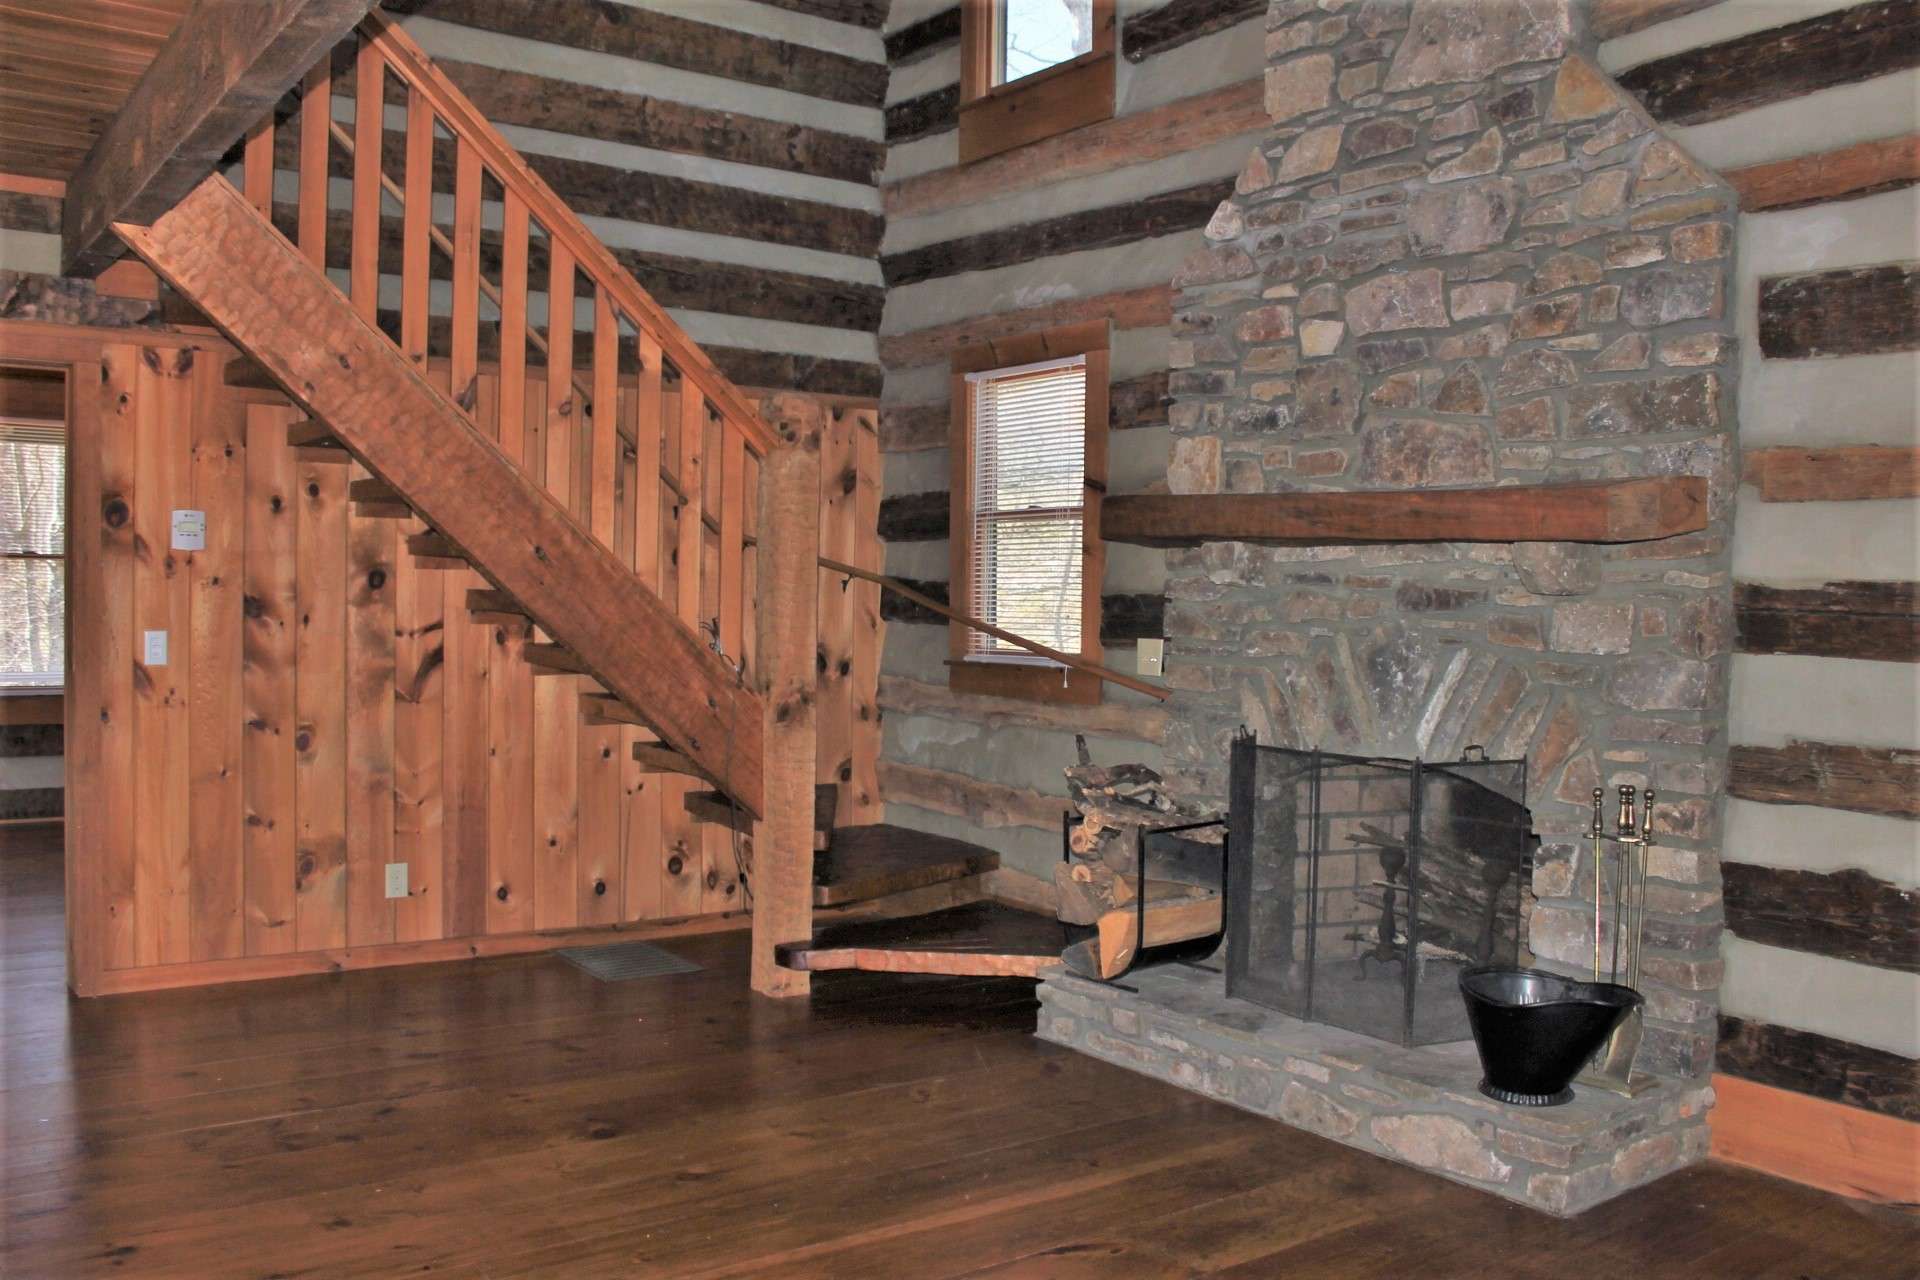 The great room is warm and inviting with rustic details that enhance the experience of log home living.